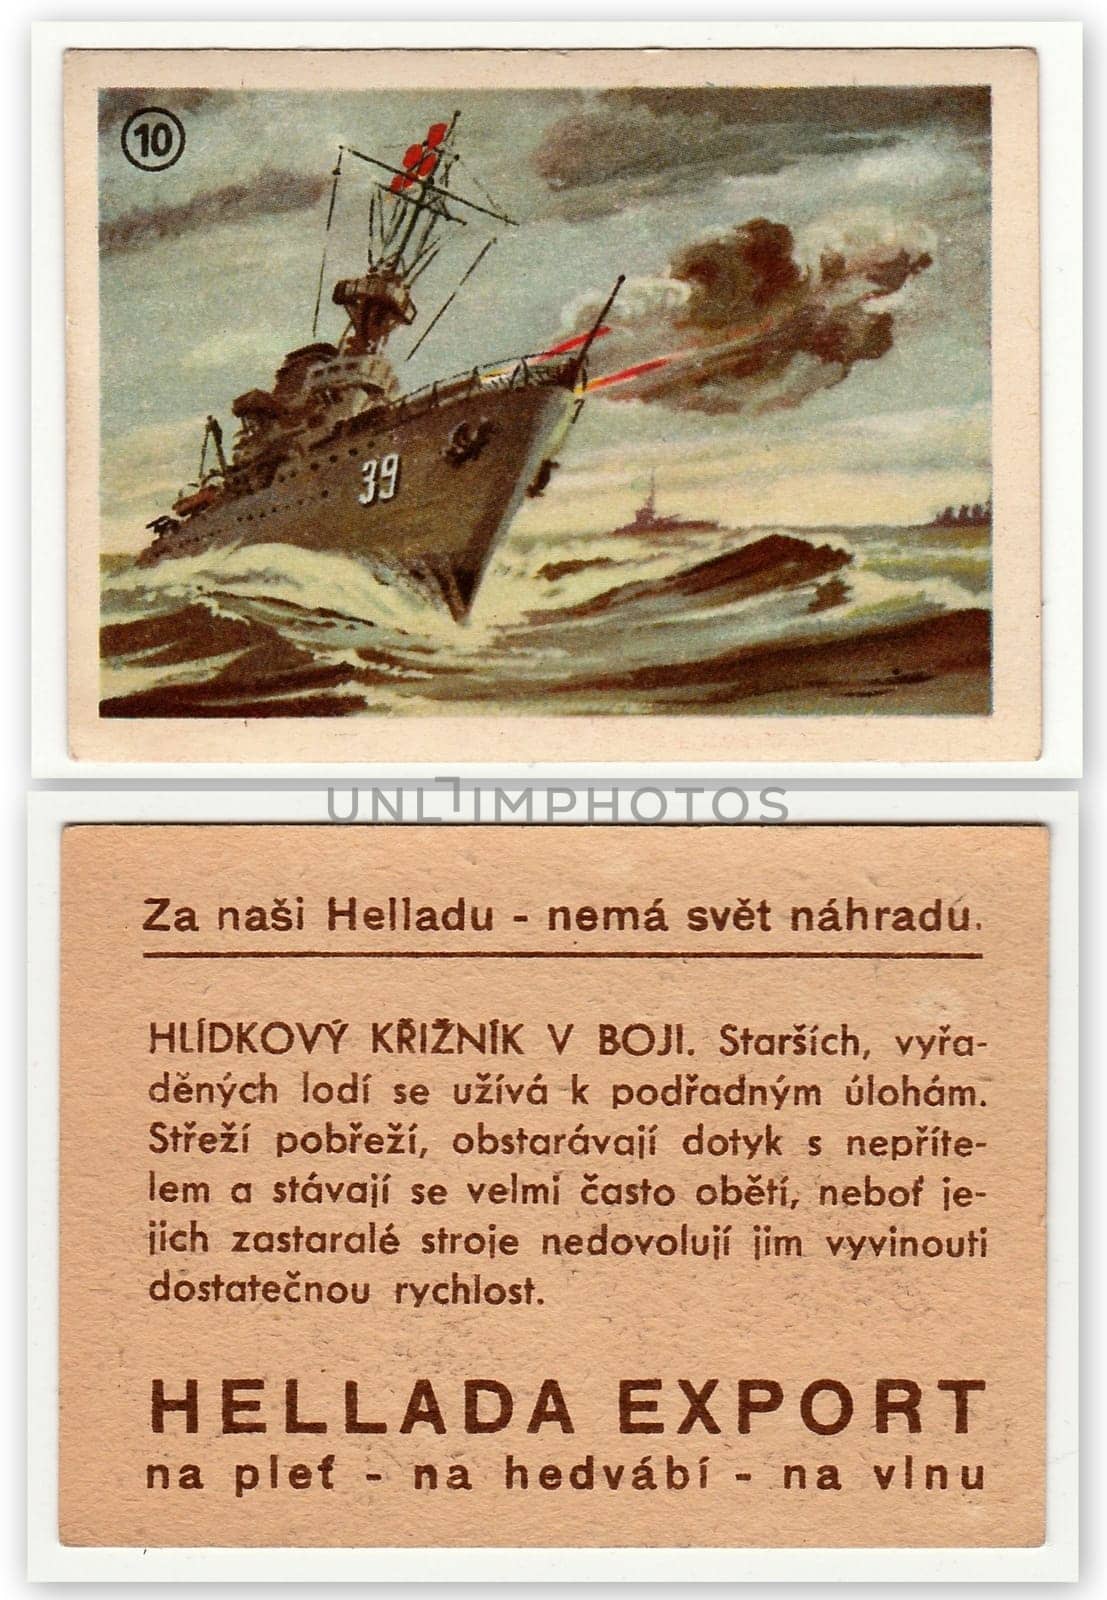 THE CZECHOSLOVAK REPUBLIC - CIRCA 1940: Vintage advertising card. Retro advert is for Hellada - famous producer of laundry soap.